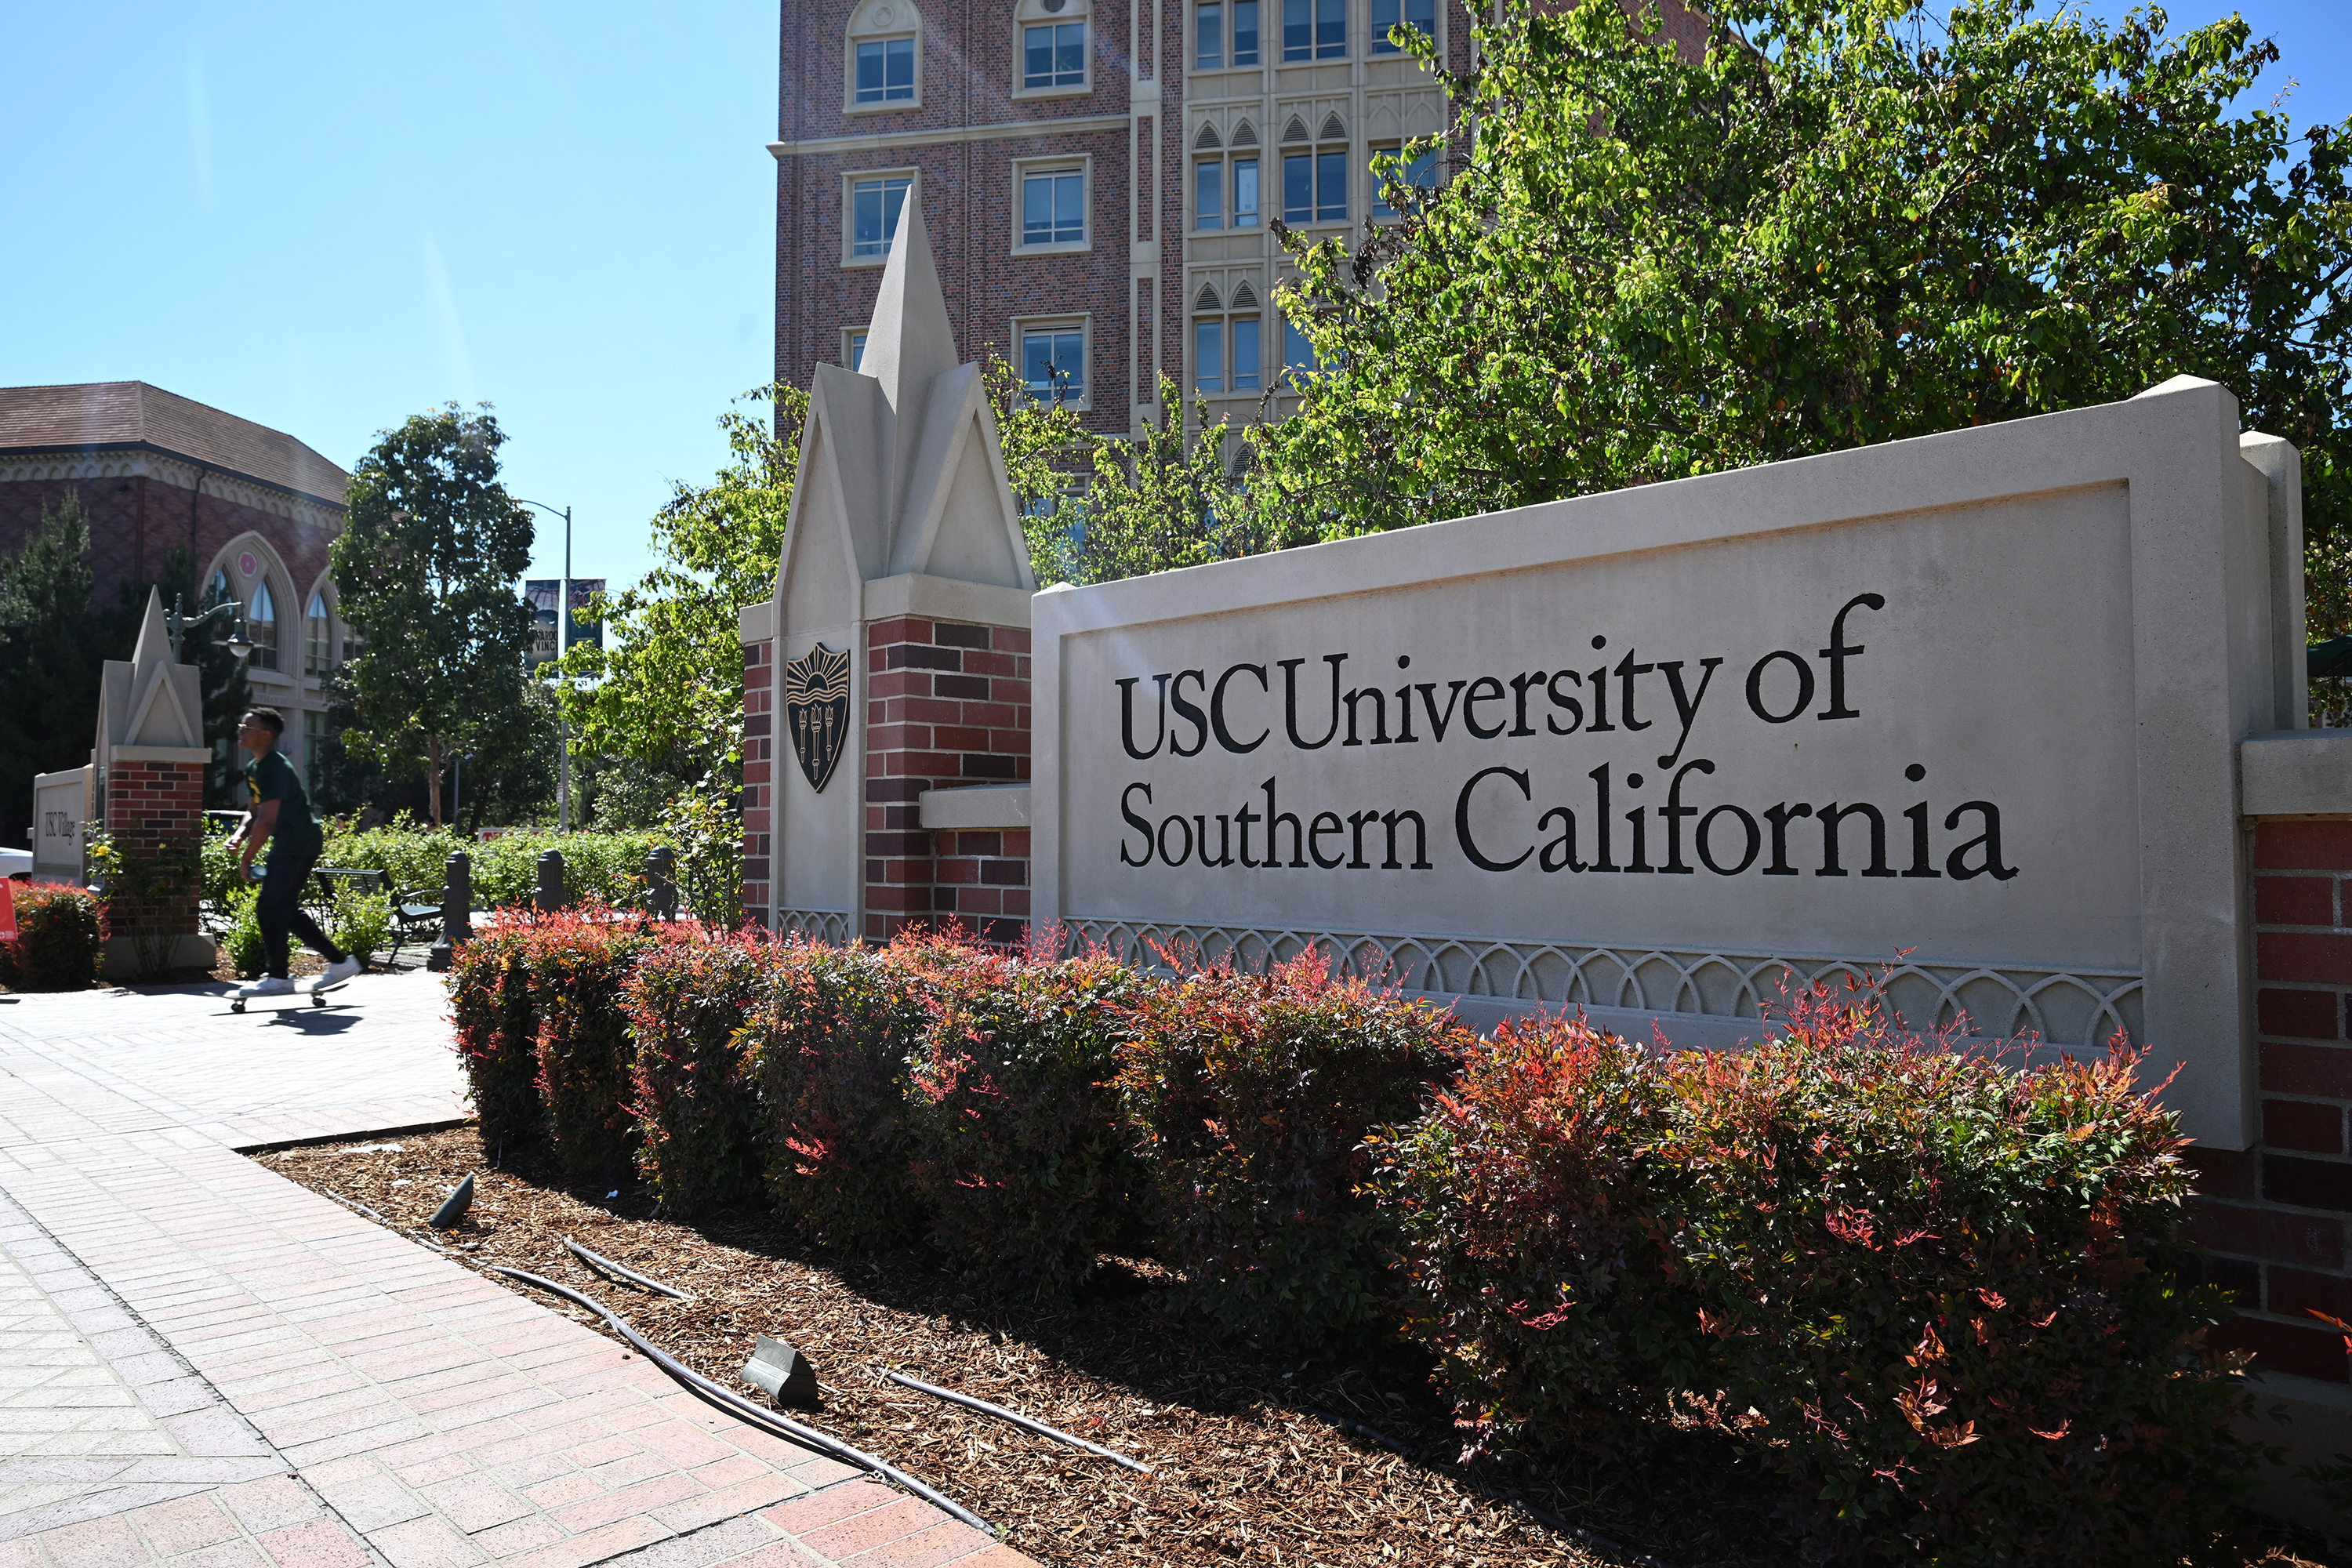 The University of Southern California's campus on April 16, in Los Angeles, California.